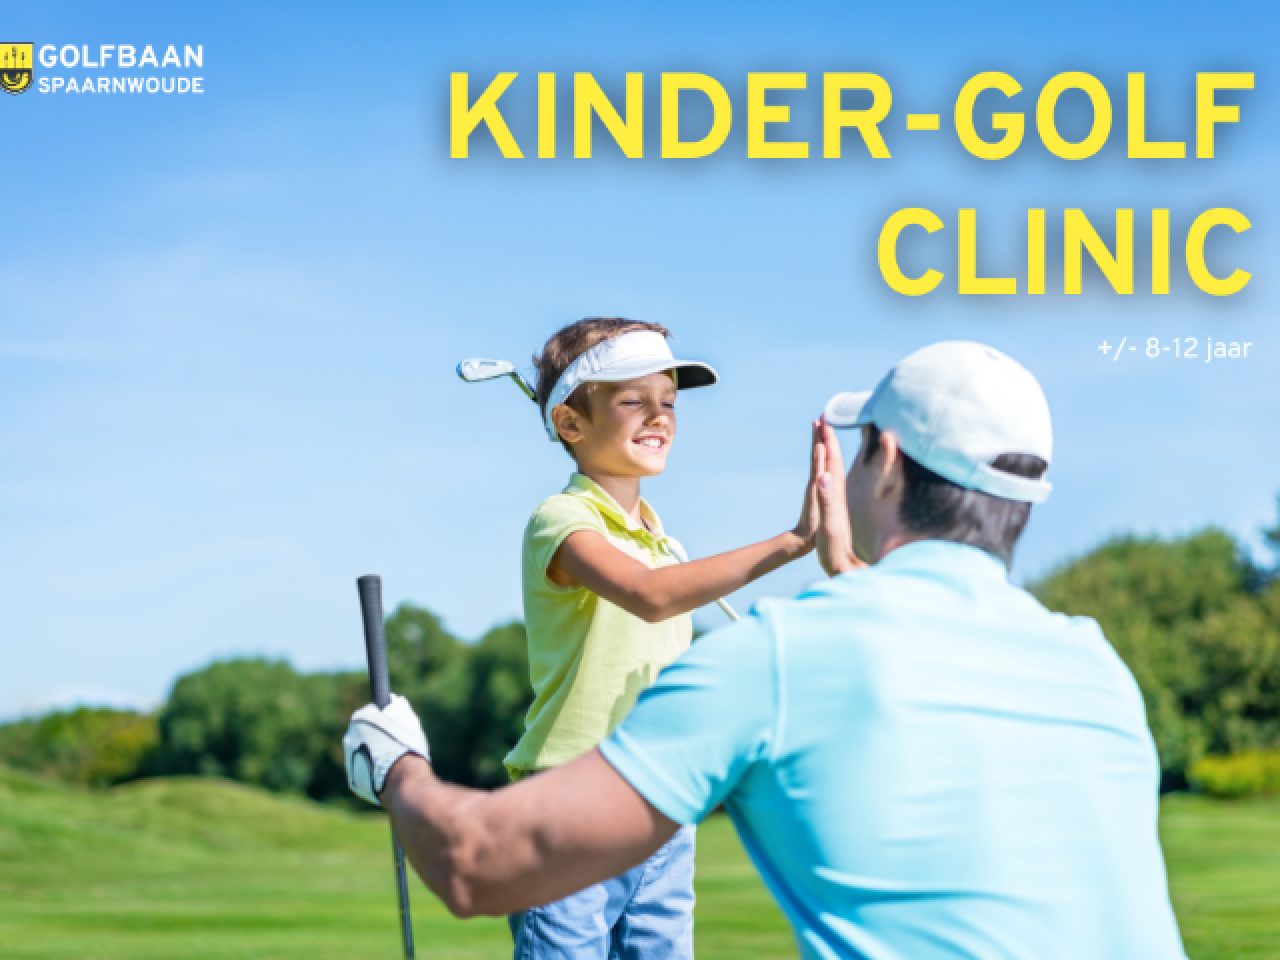 Child and parent high-fiving on the golf course